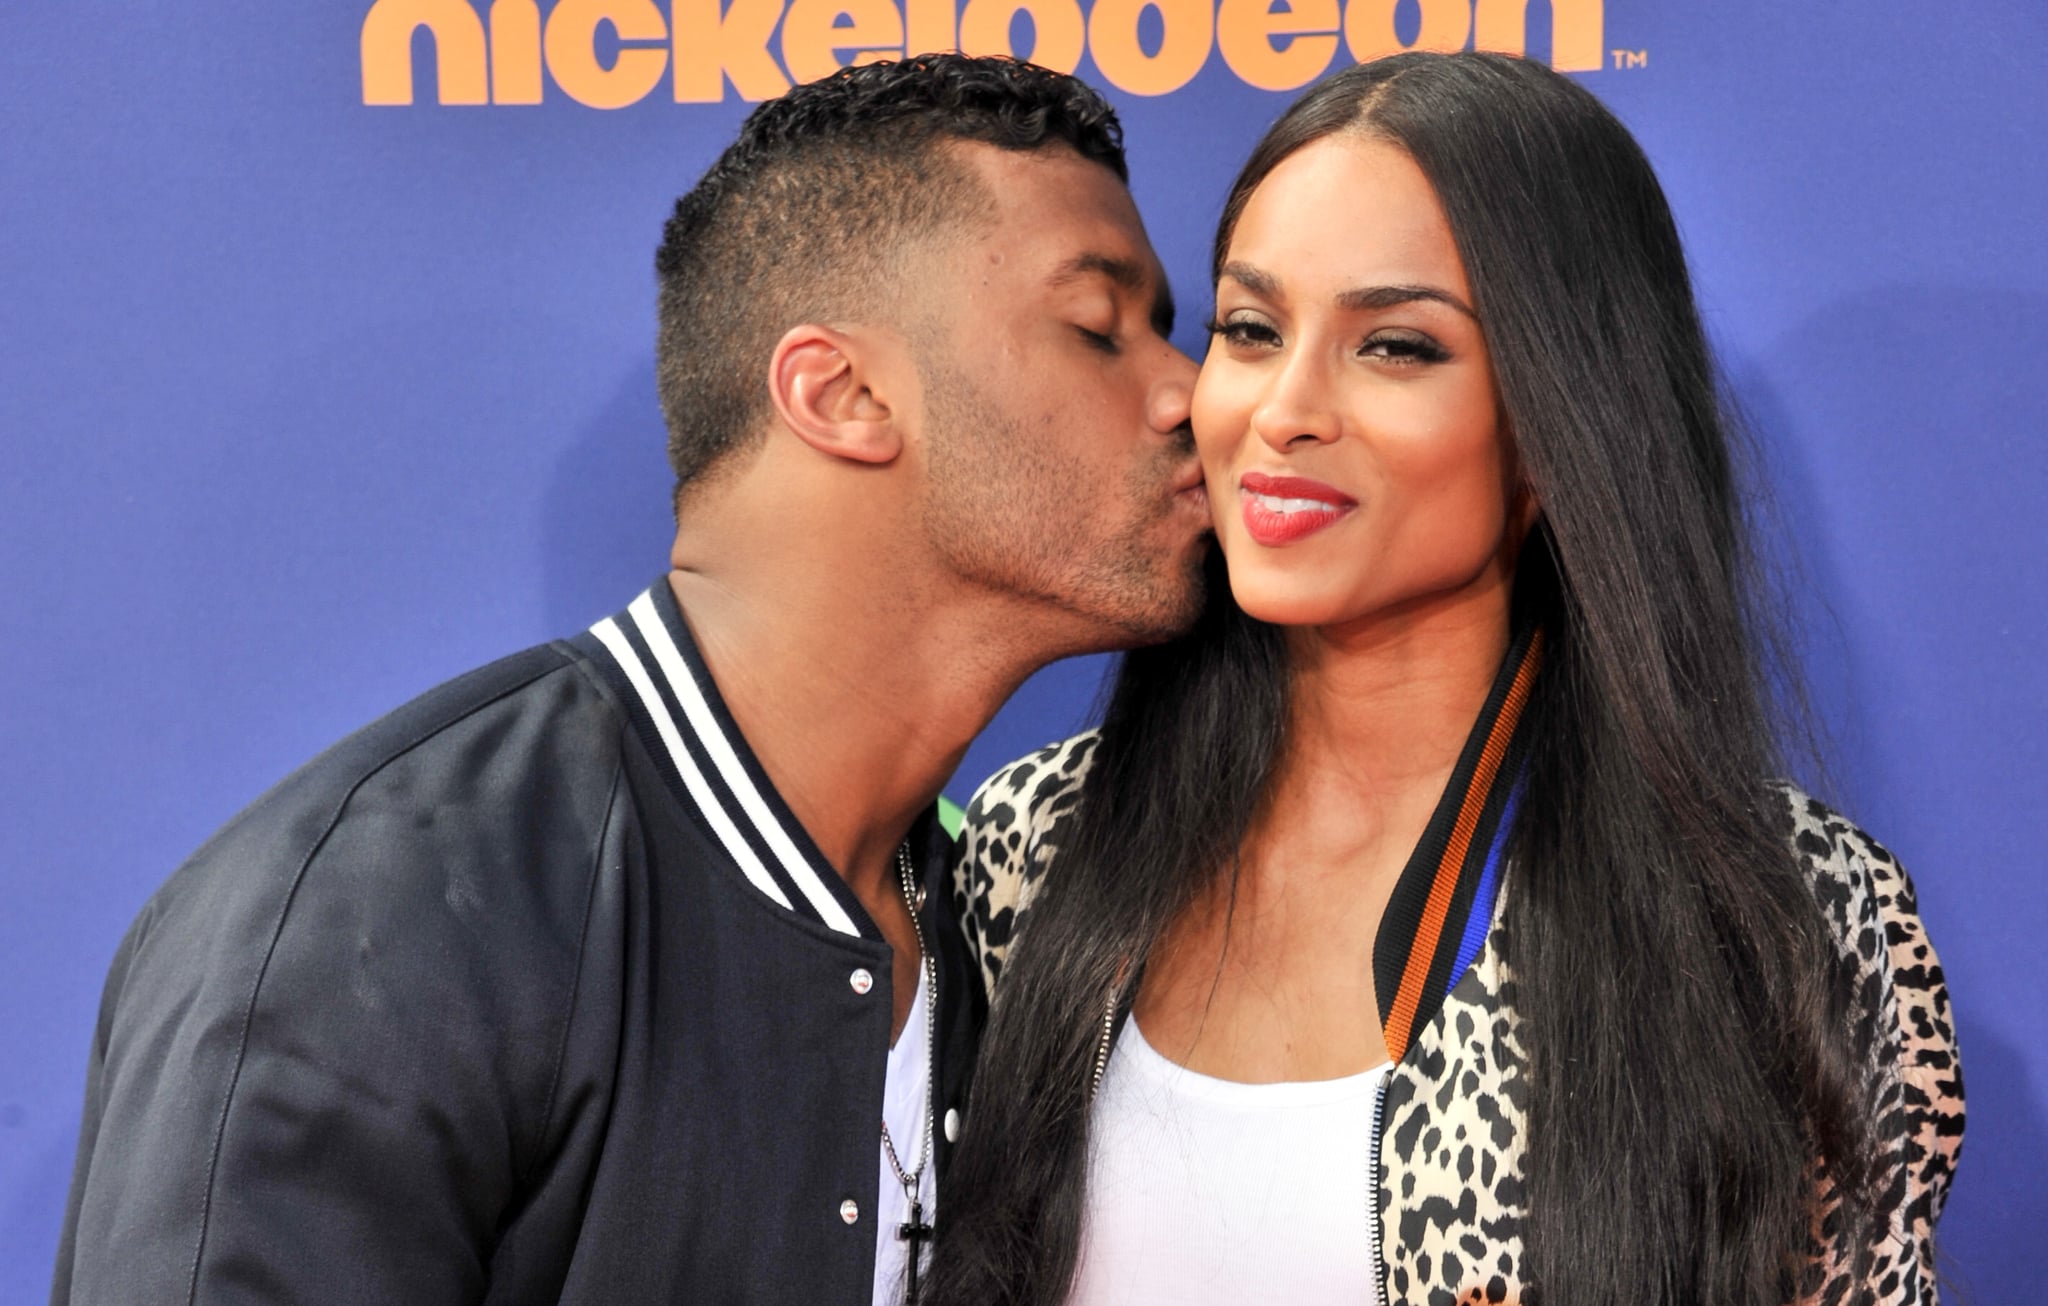 Belém dating russell in wilson ciara Who is